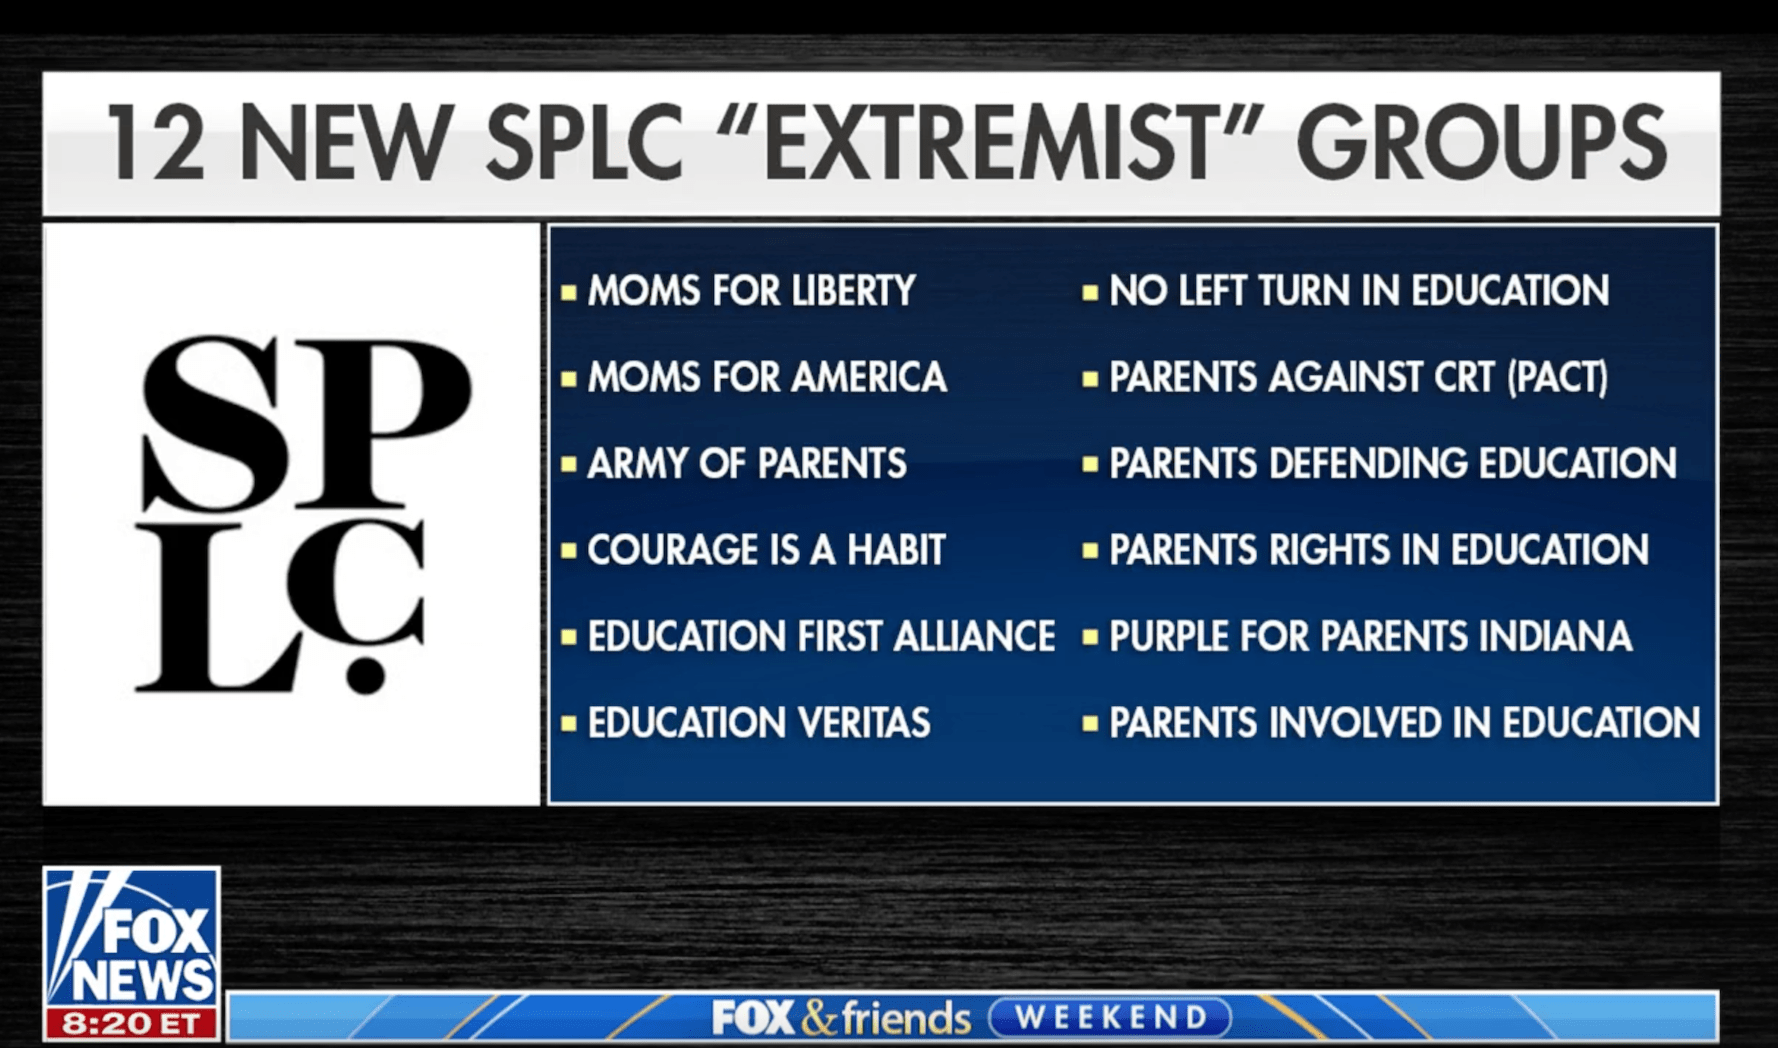 Parents Rights Groups labelled as Extremists